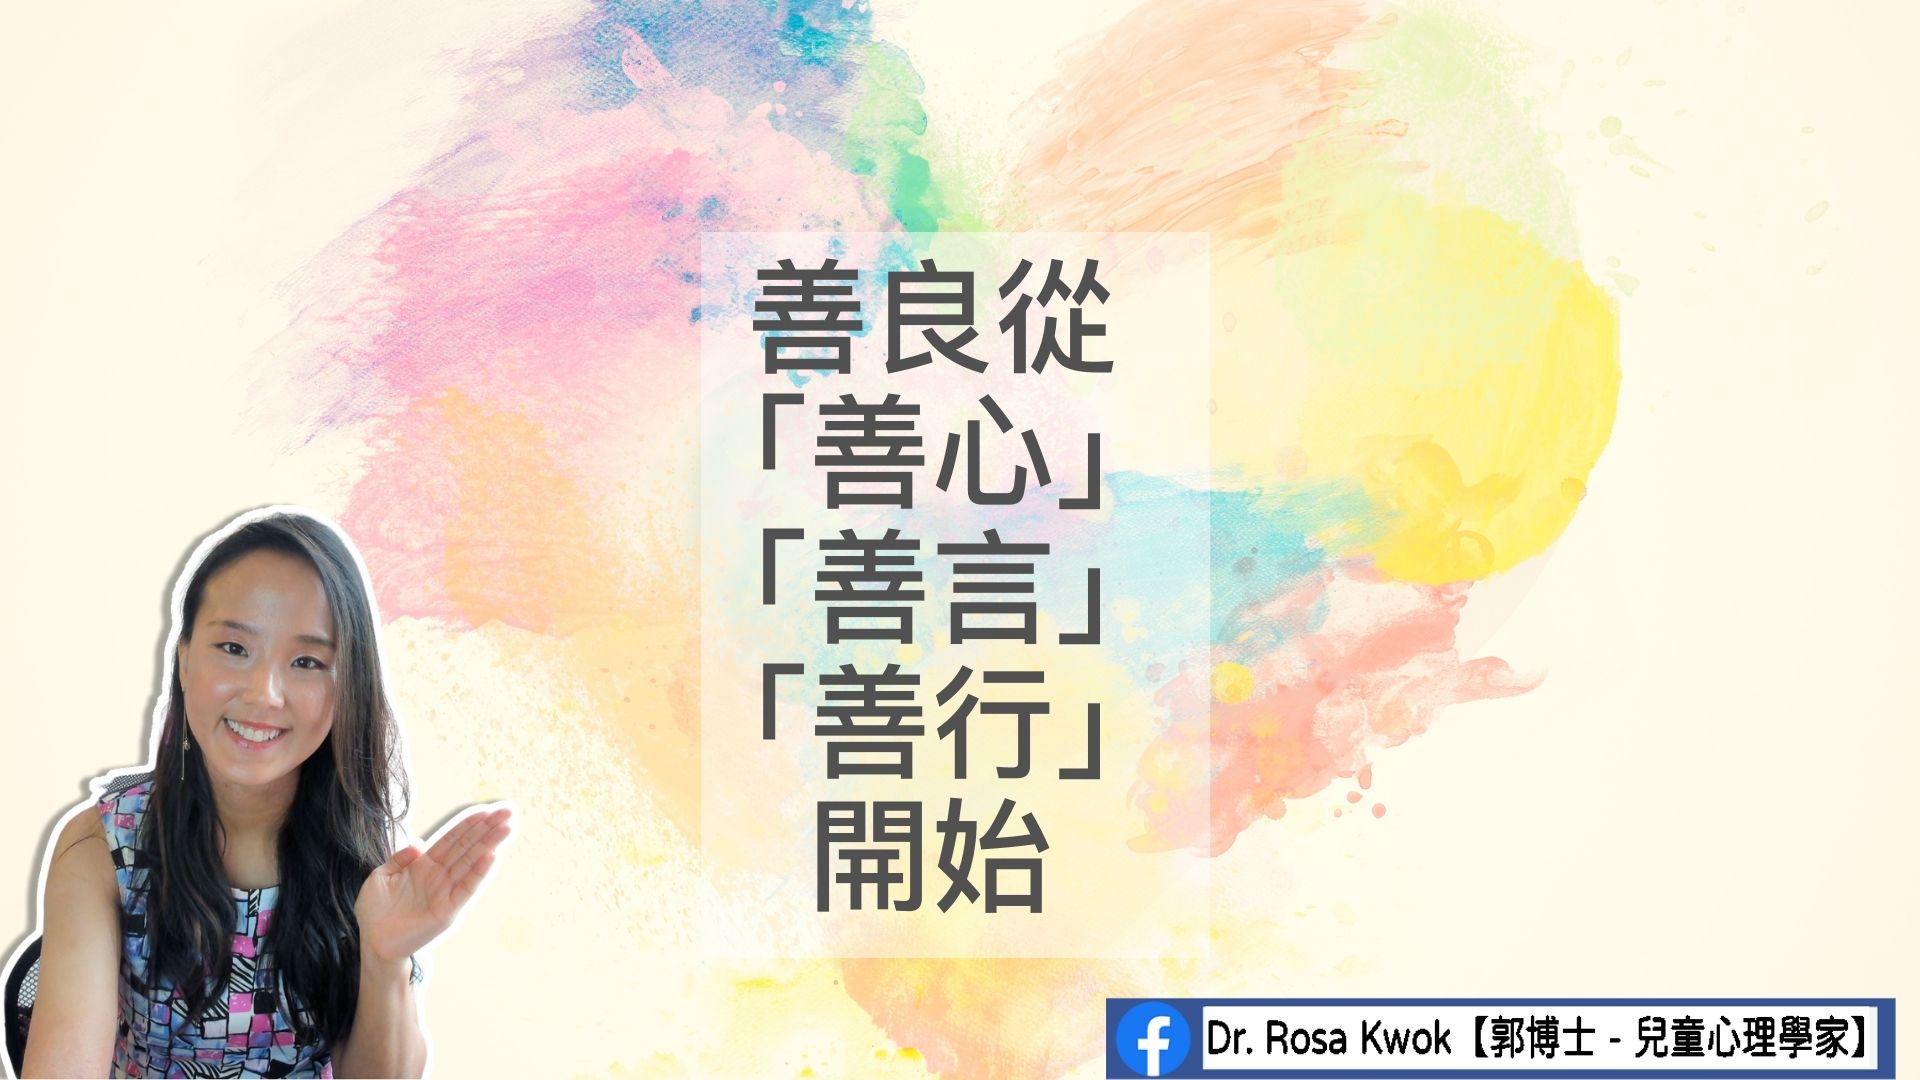 Rainbow Watercolour Heart Daily Reminder Quote Instagram Post Presentation 169